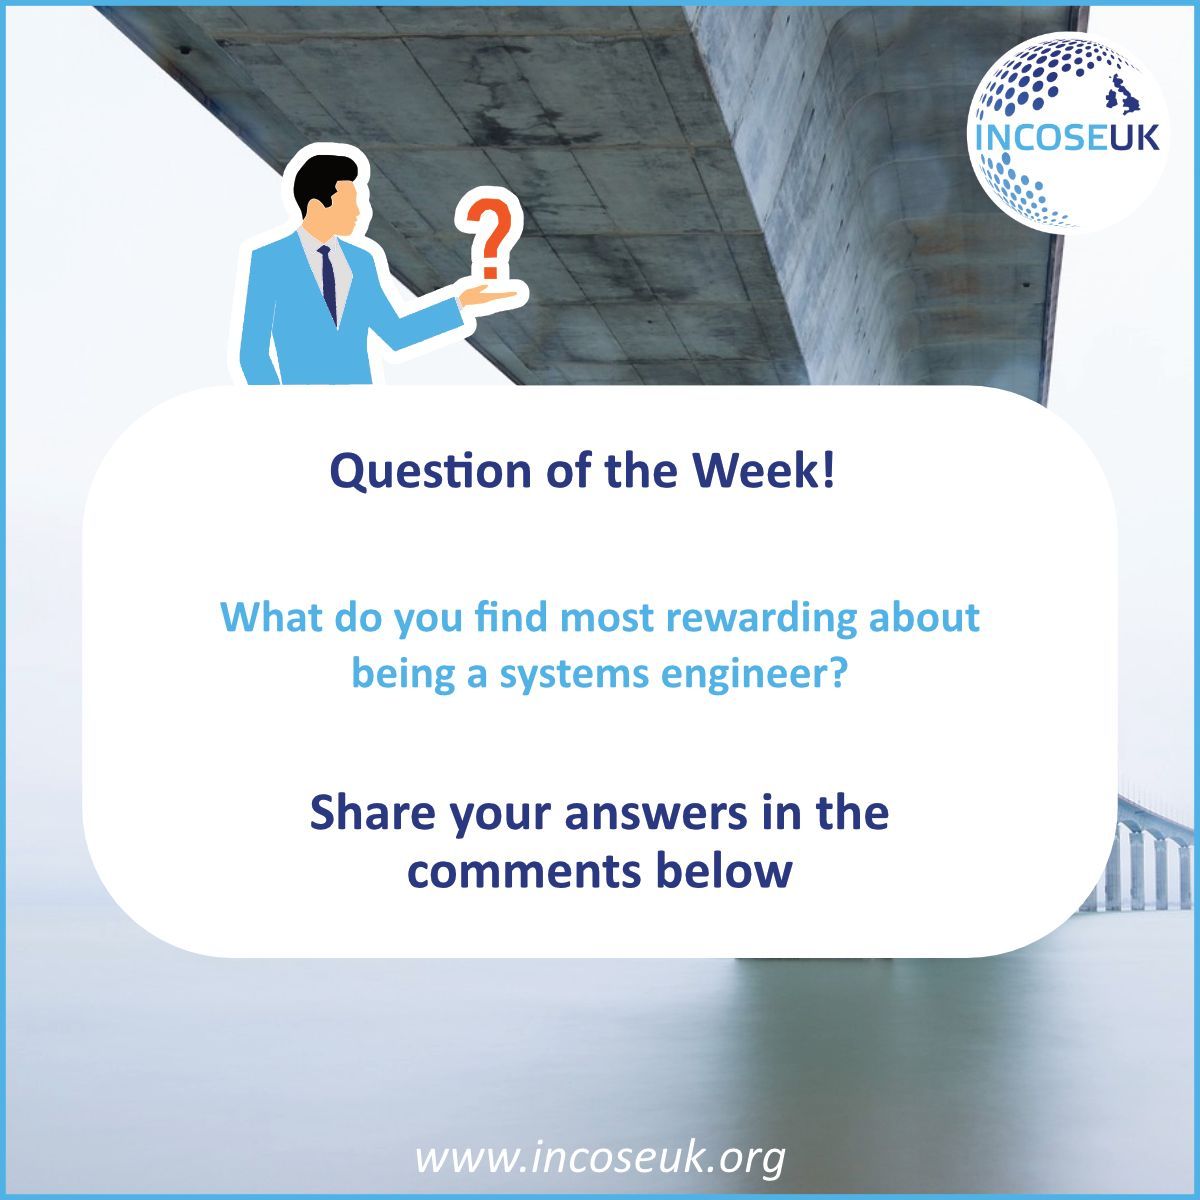 Question of the Week 💡 

What do you find most rewarding about being a systems engineer?

Share your thoughts and tips in the comments. Let's learn from each other's experiences!

#SystemsEngineering #Engineering #ComplexEngineering